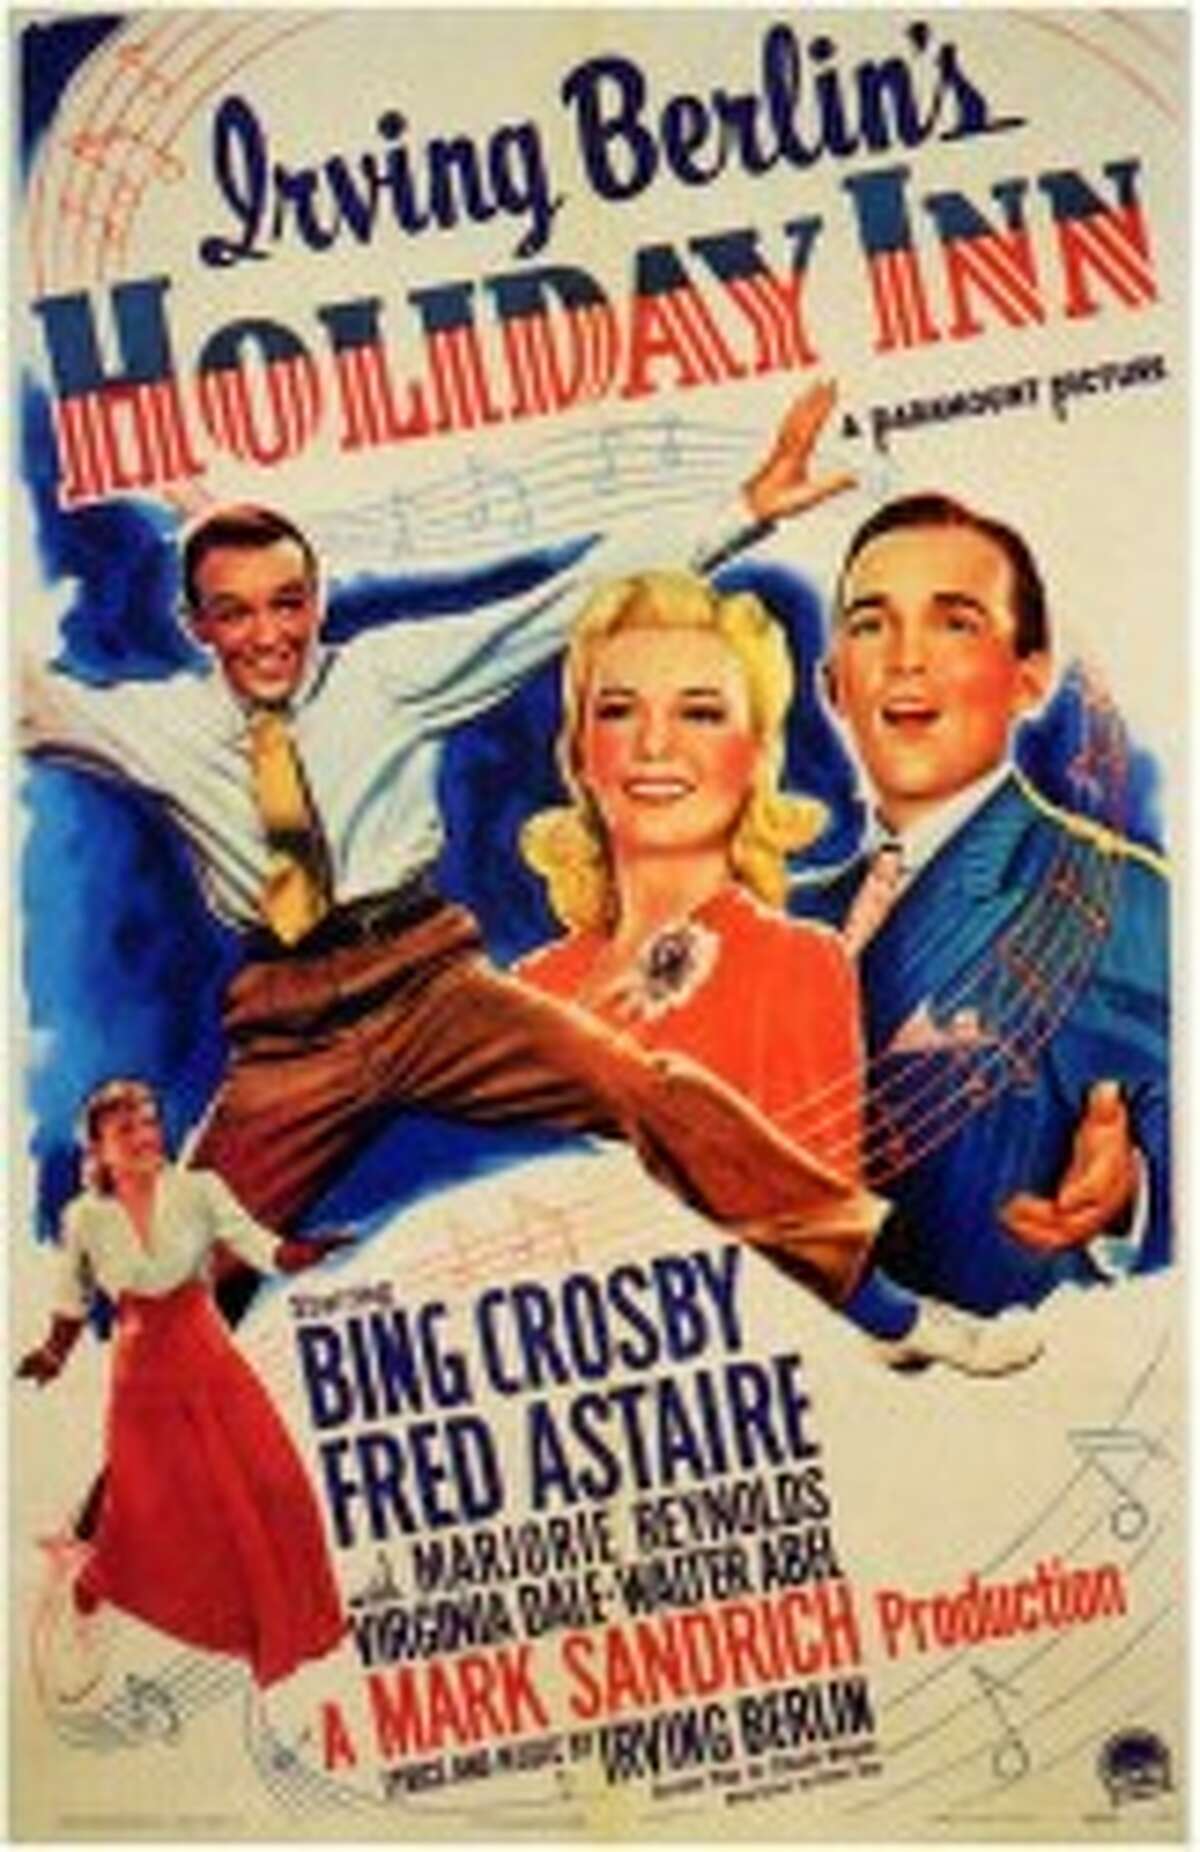 This is the poster for the 1942 film "Holiday Inn," which starred Bing Crosby and Fred Astaire and featured the popular holiday song "White Christmas." The movie played for three days at Manistee’s Vogue Theatre, opening on Sept. 20, 1942. (Courtesy Photo/Manistee County Historical Museum)